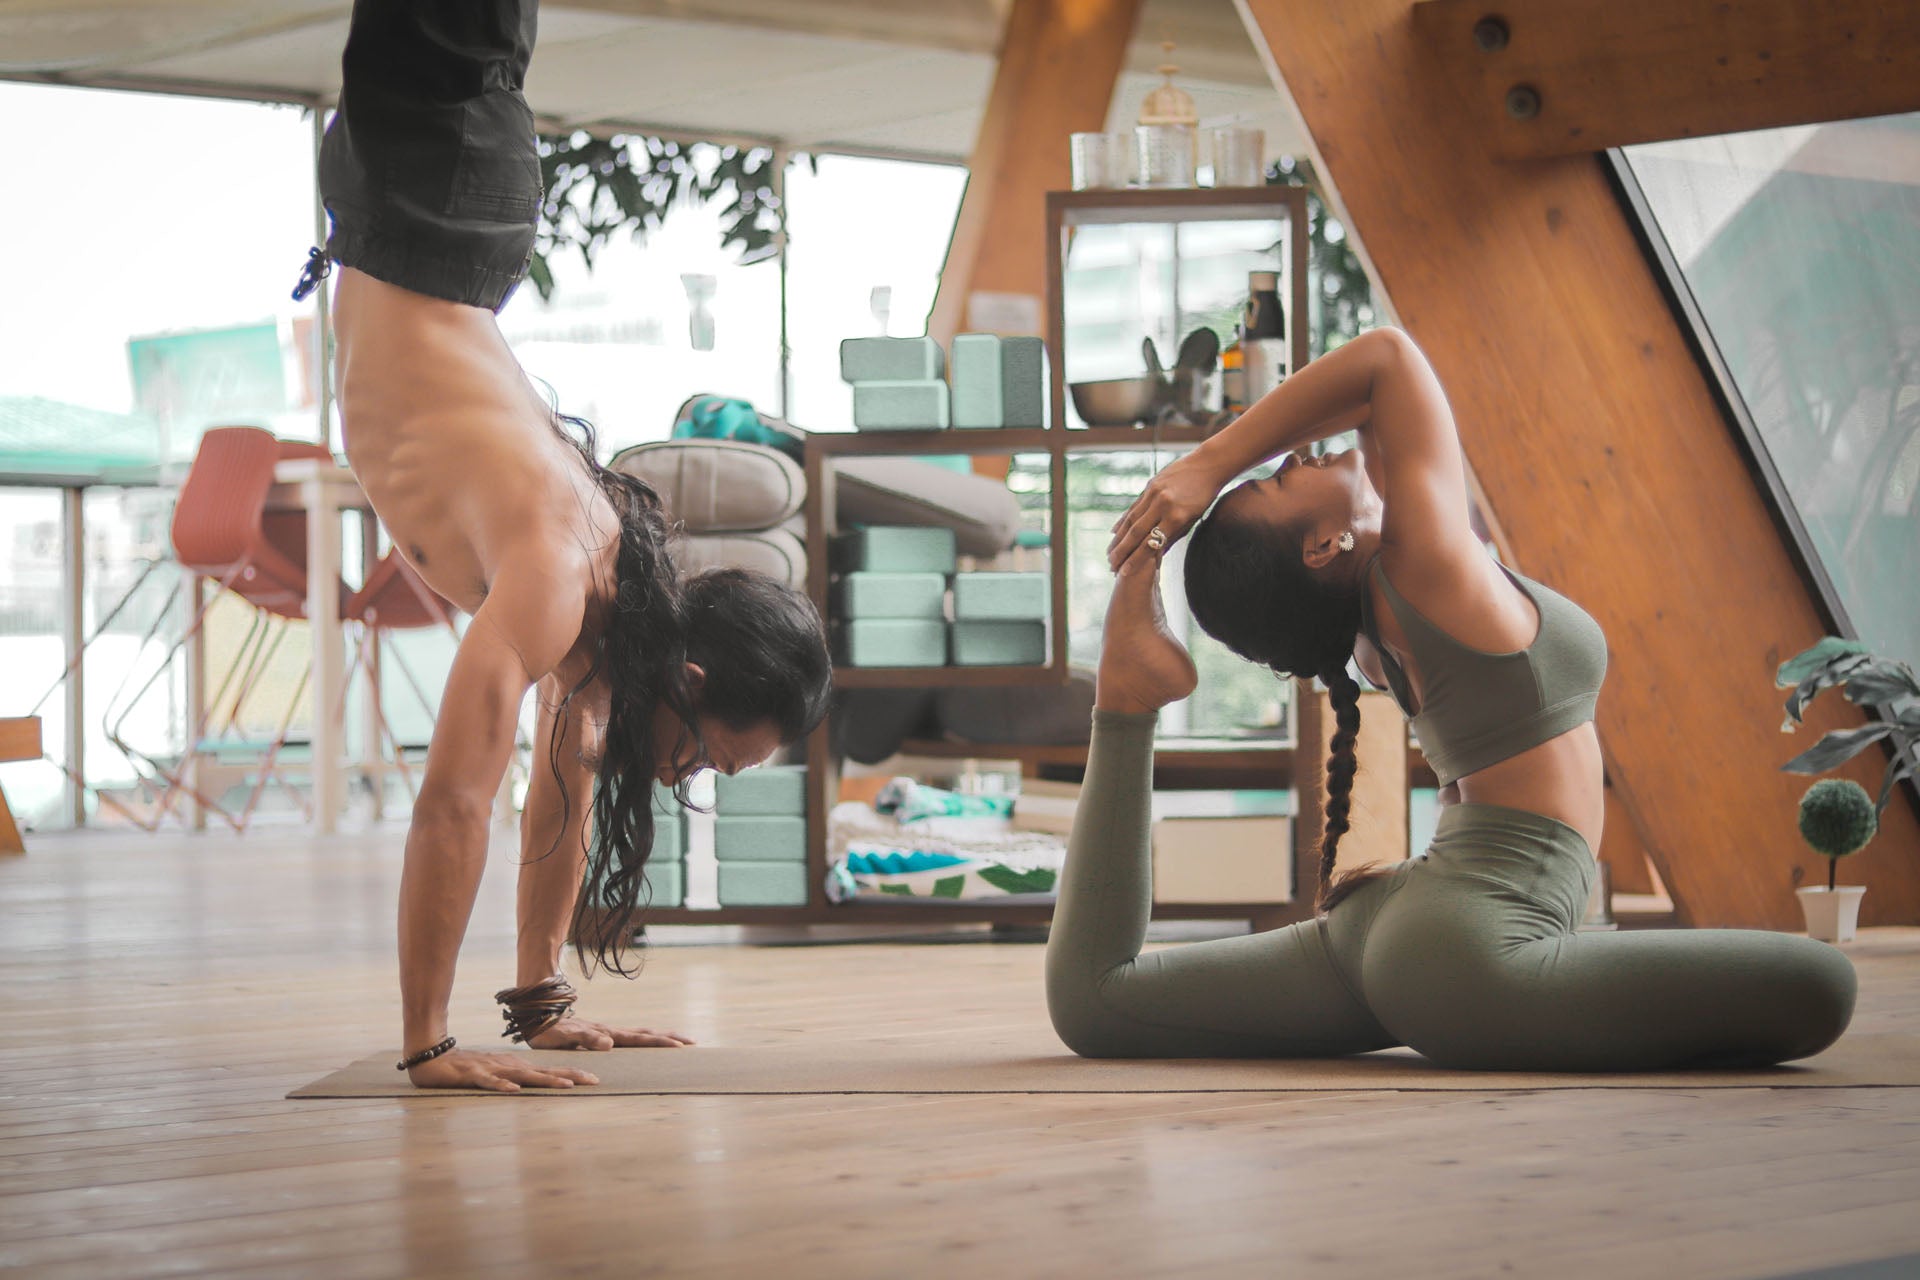 Looking for a Reason to Try Hot Yoga at Home? Here are 5 Great Ones!